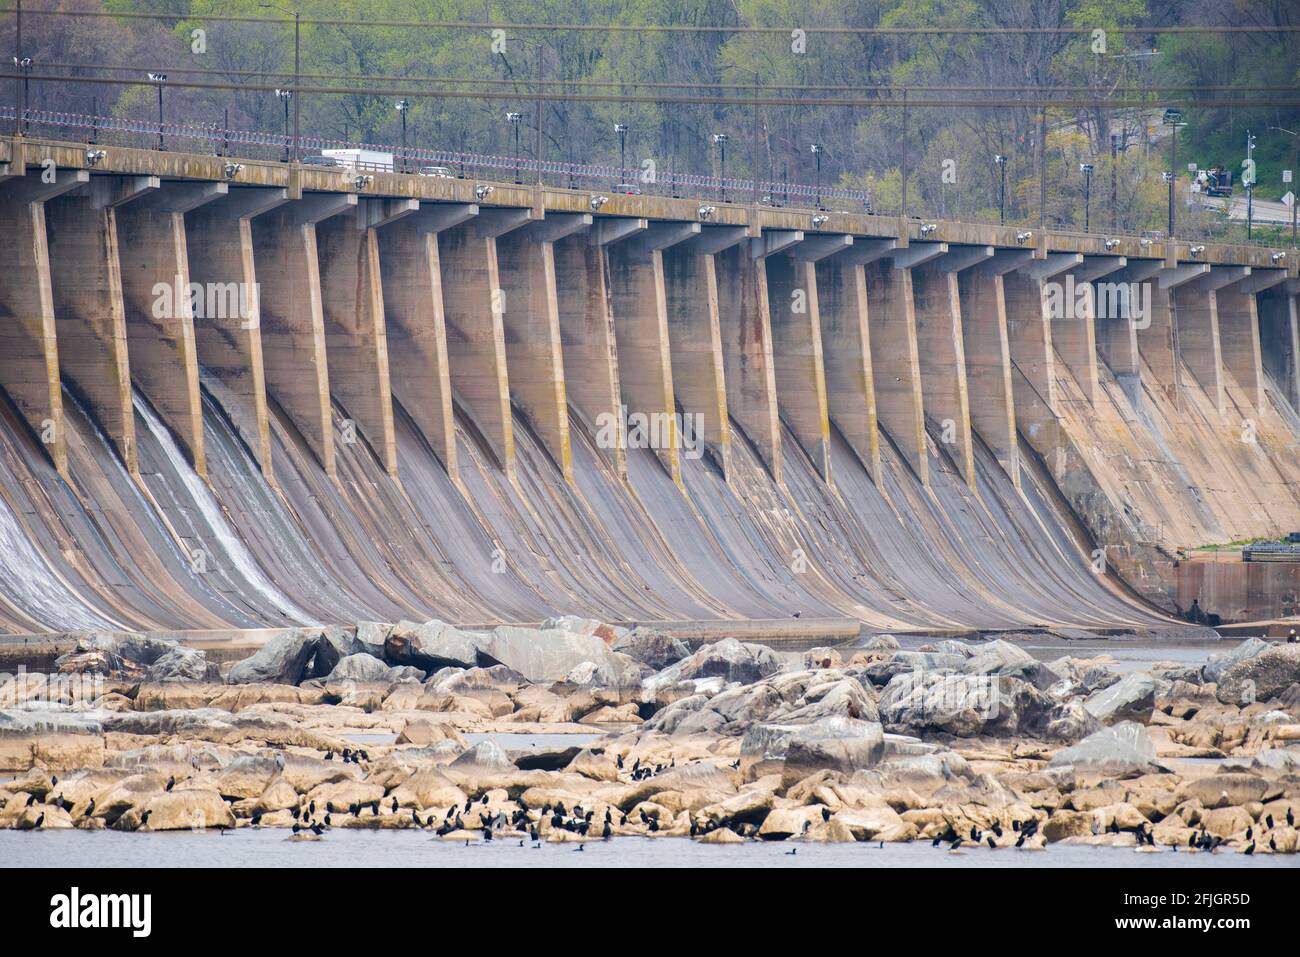 The Conowingo Dam on the Susquehanna River in Cecil County, Maryland. Stock Photo